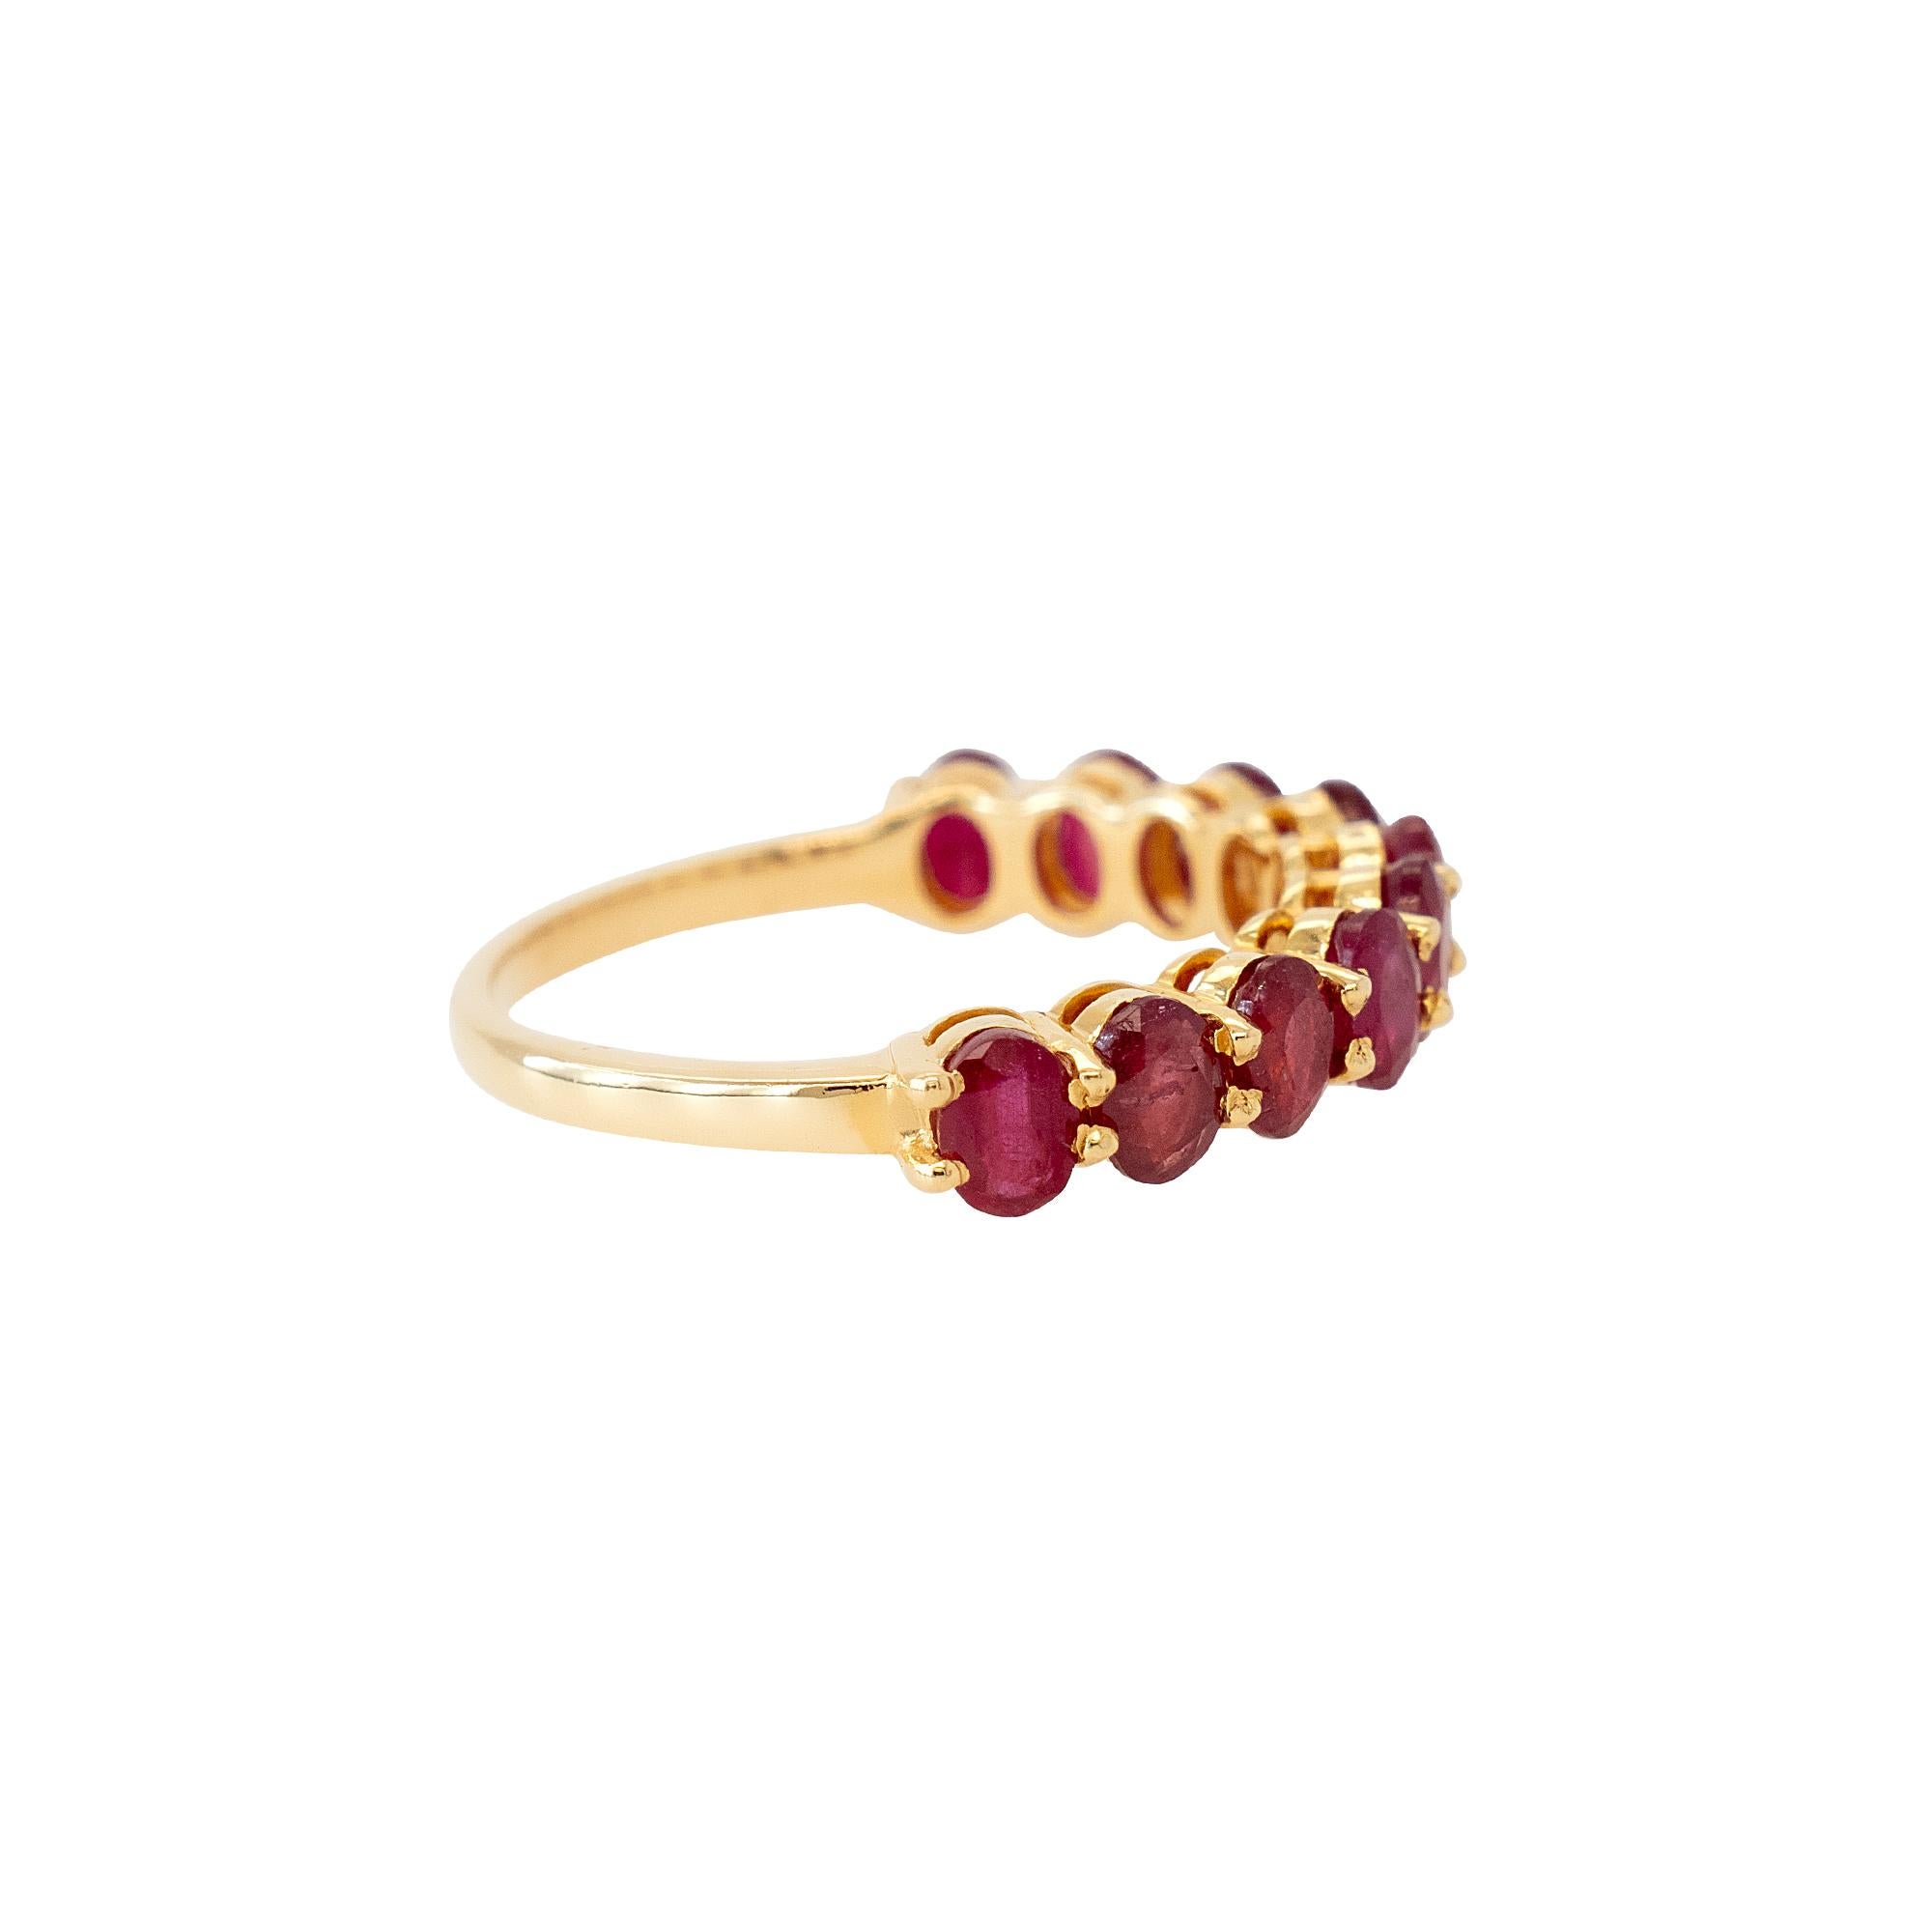 Gemstone Details: 2.17ctw Oval Cut Ruby
Ring Material: 
14k Yellow Gold
23.30mm x 4.10mm x 21.70mm
Ring Size: 7 (can be sized)
Total Weight: 2.8g (1.8dwt)
This item comes with a presentation box!
SKU: R5888

Indulge in the exquisite craftsmanship of